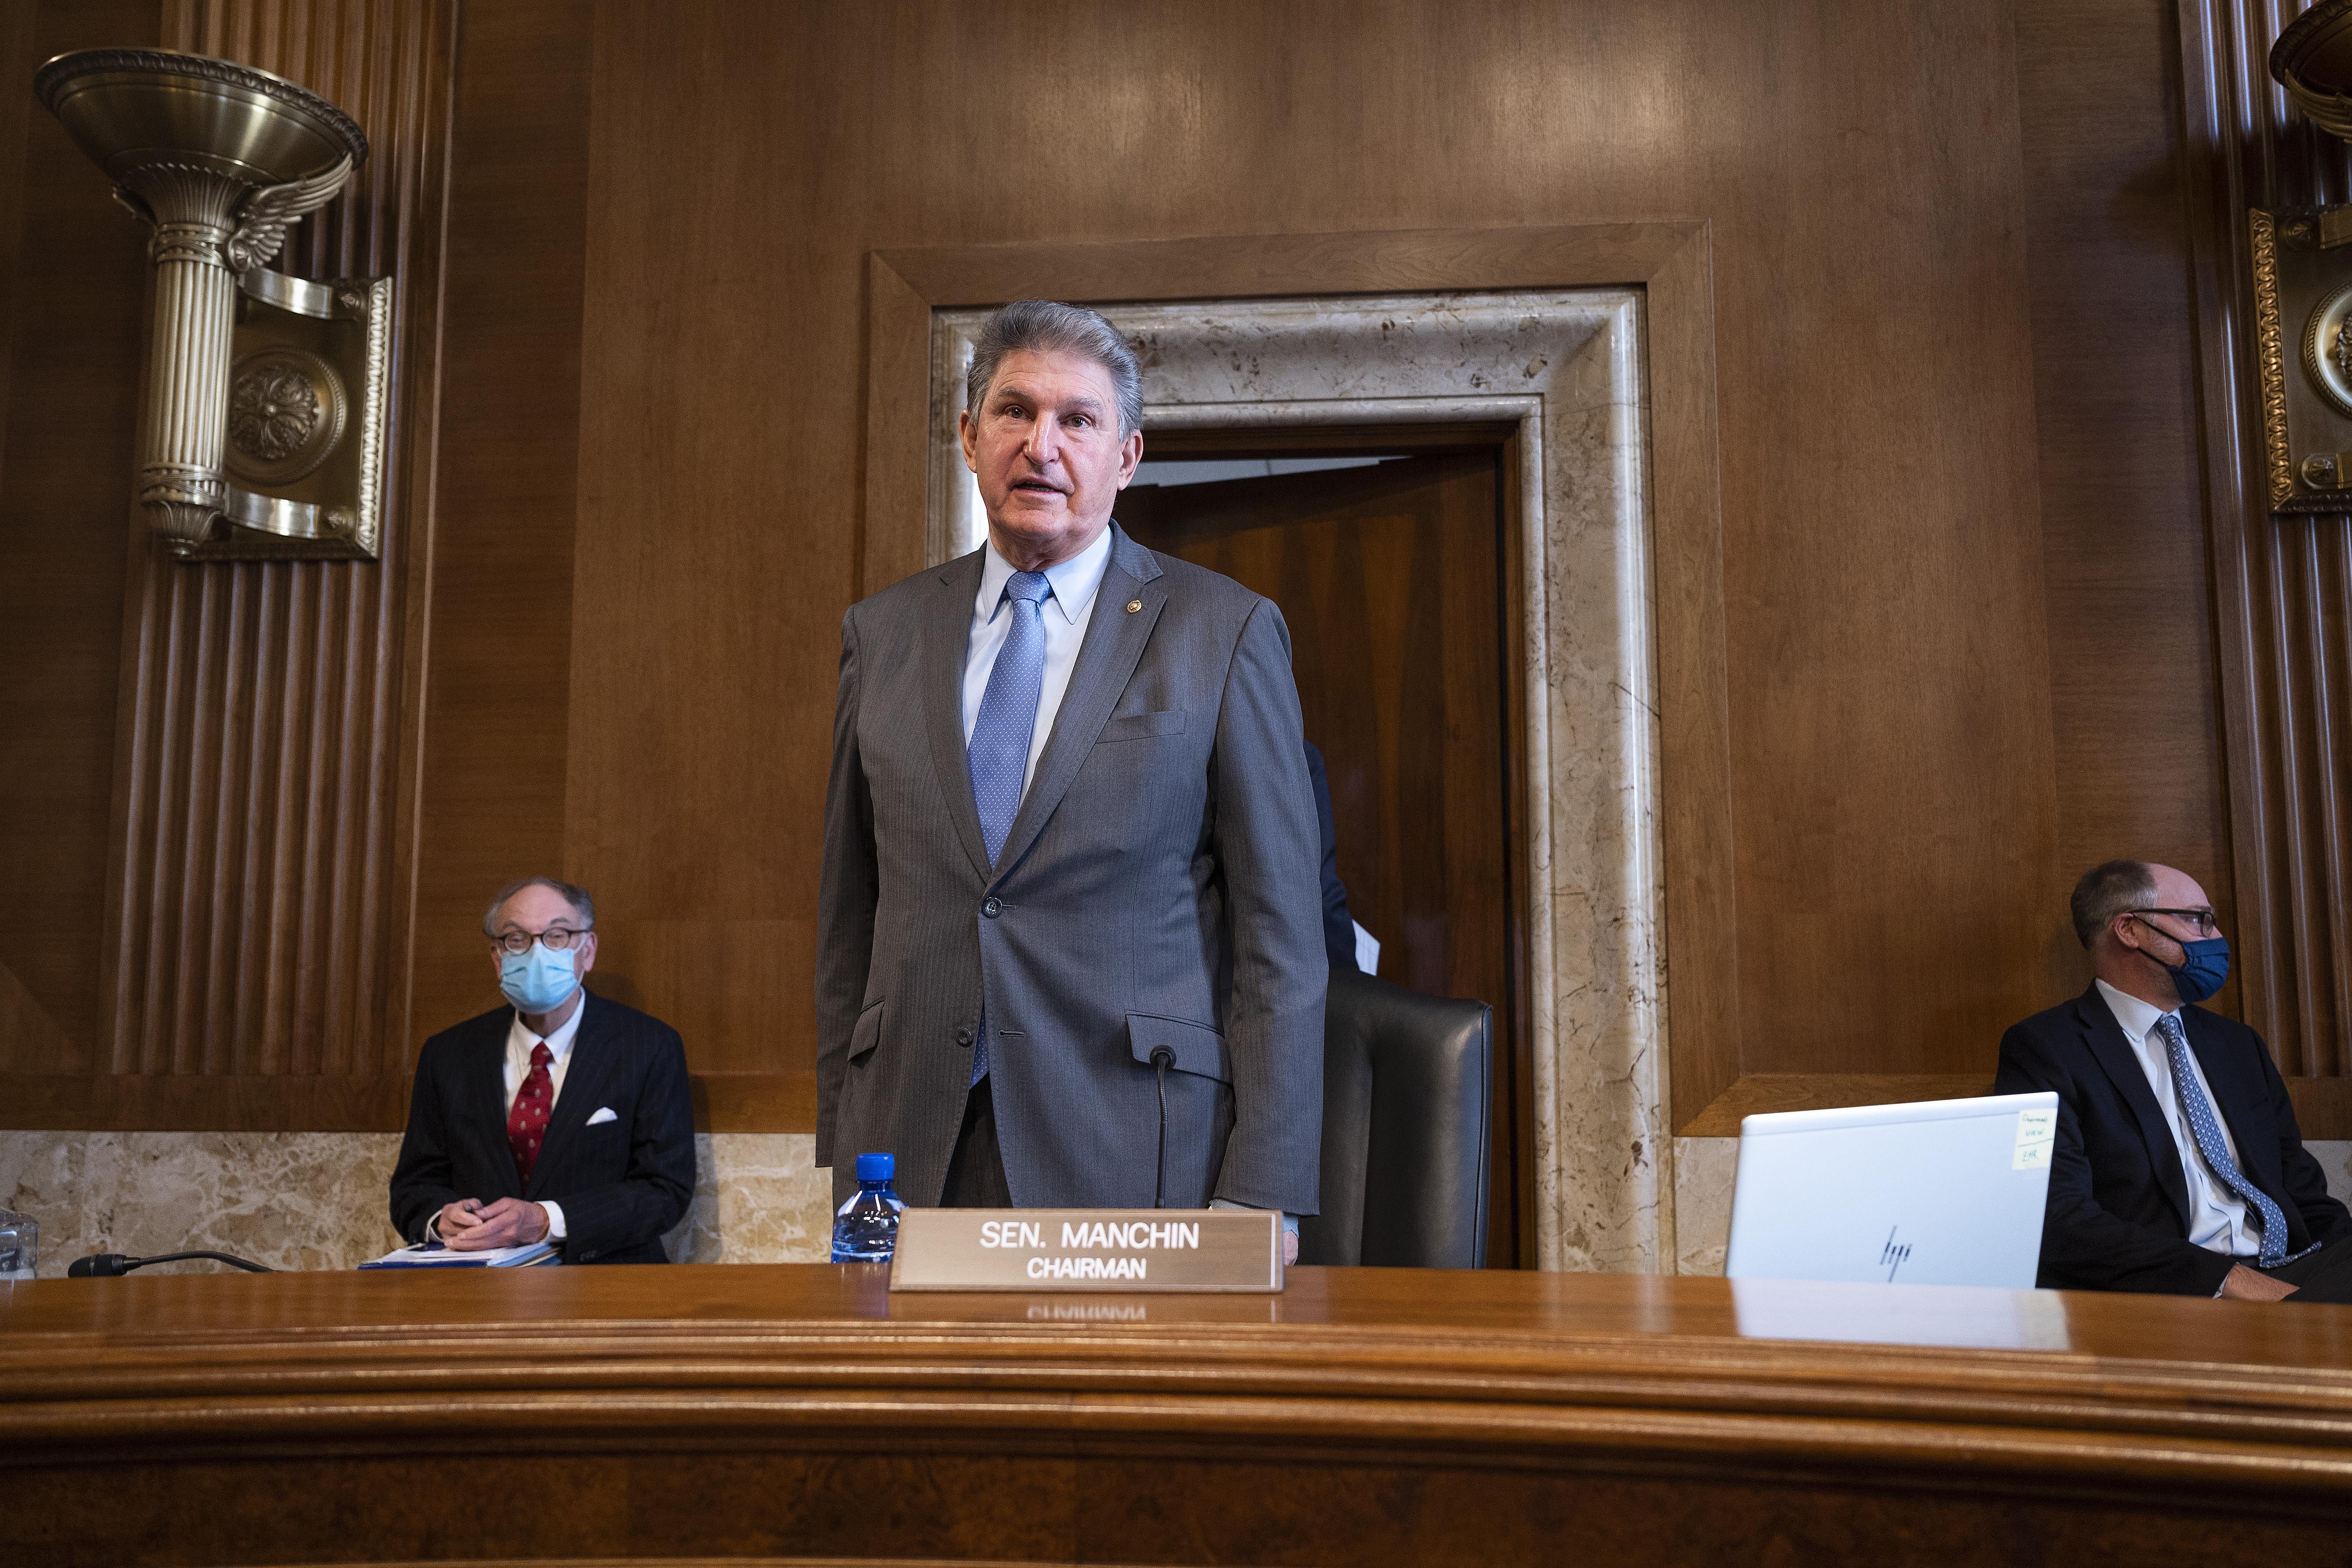 Manchin stands and speaks during a hearing